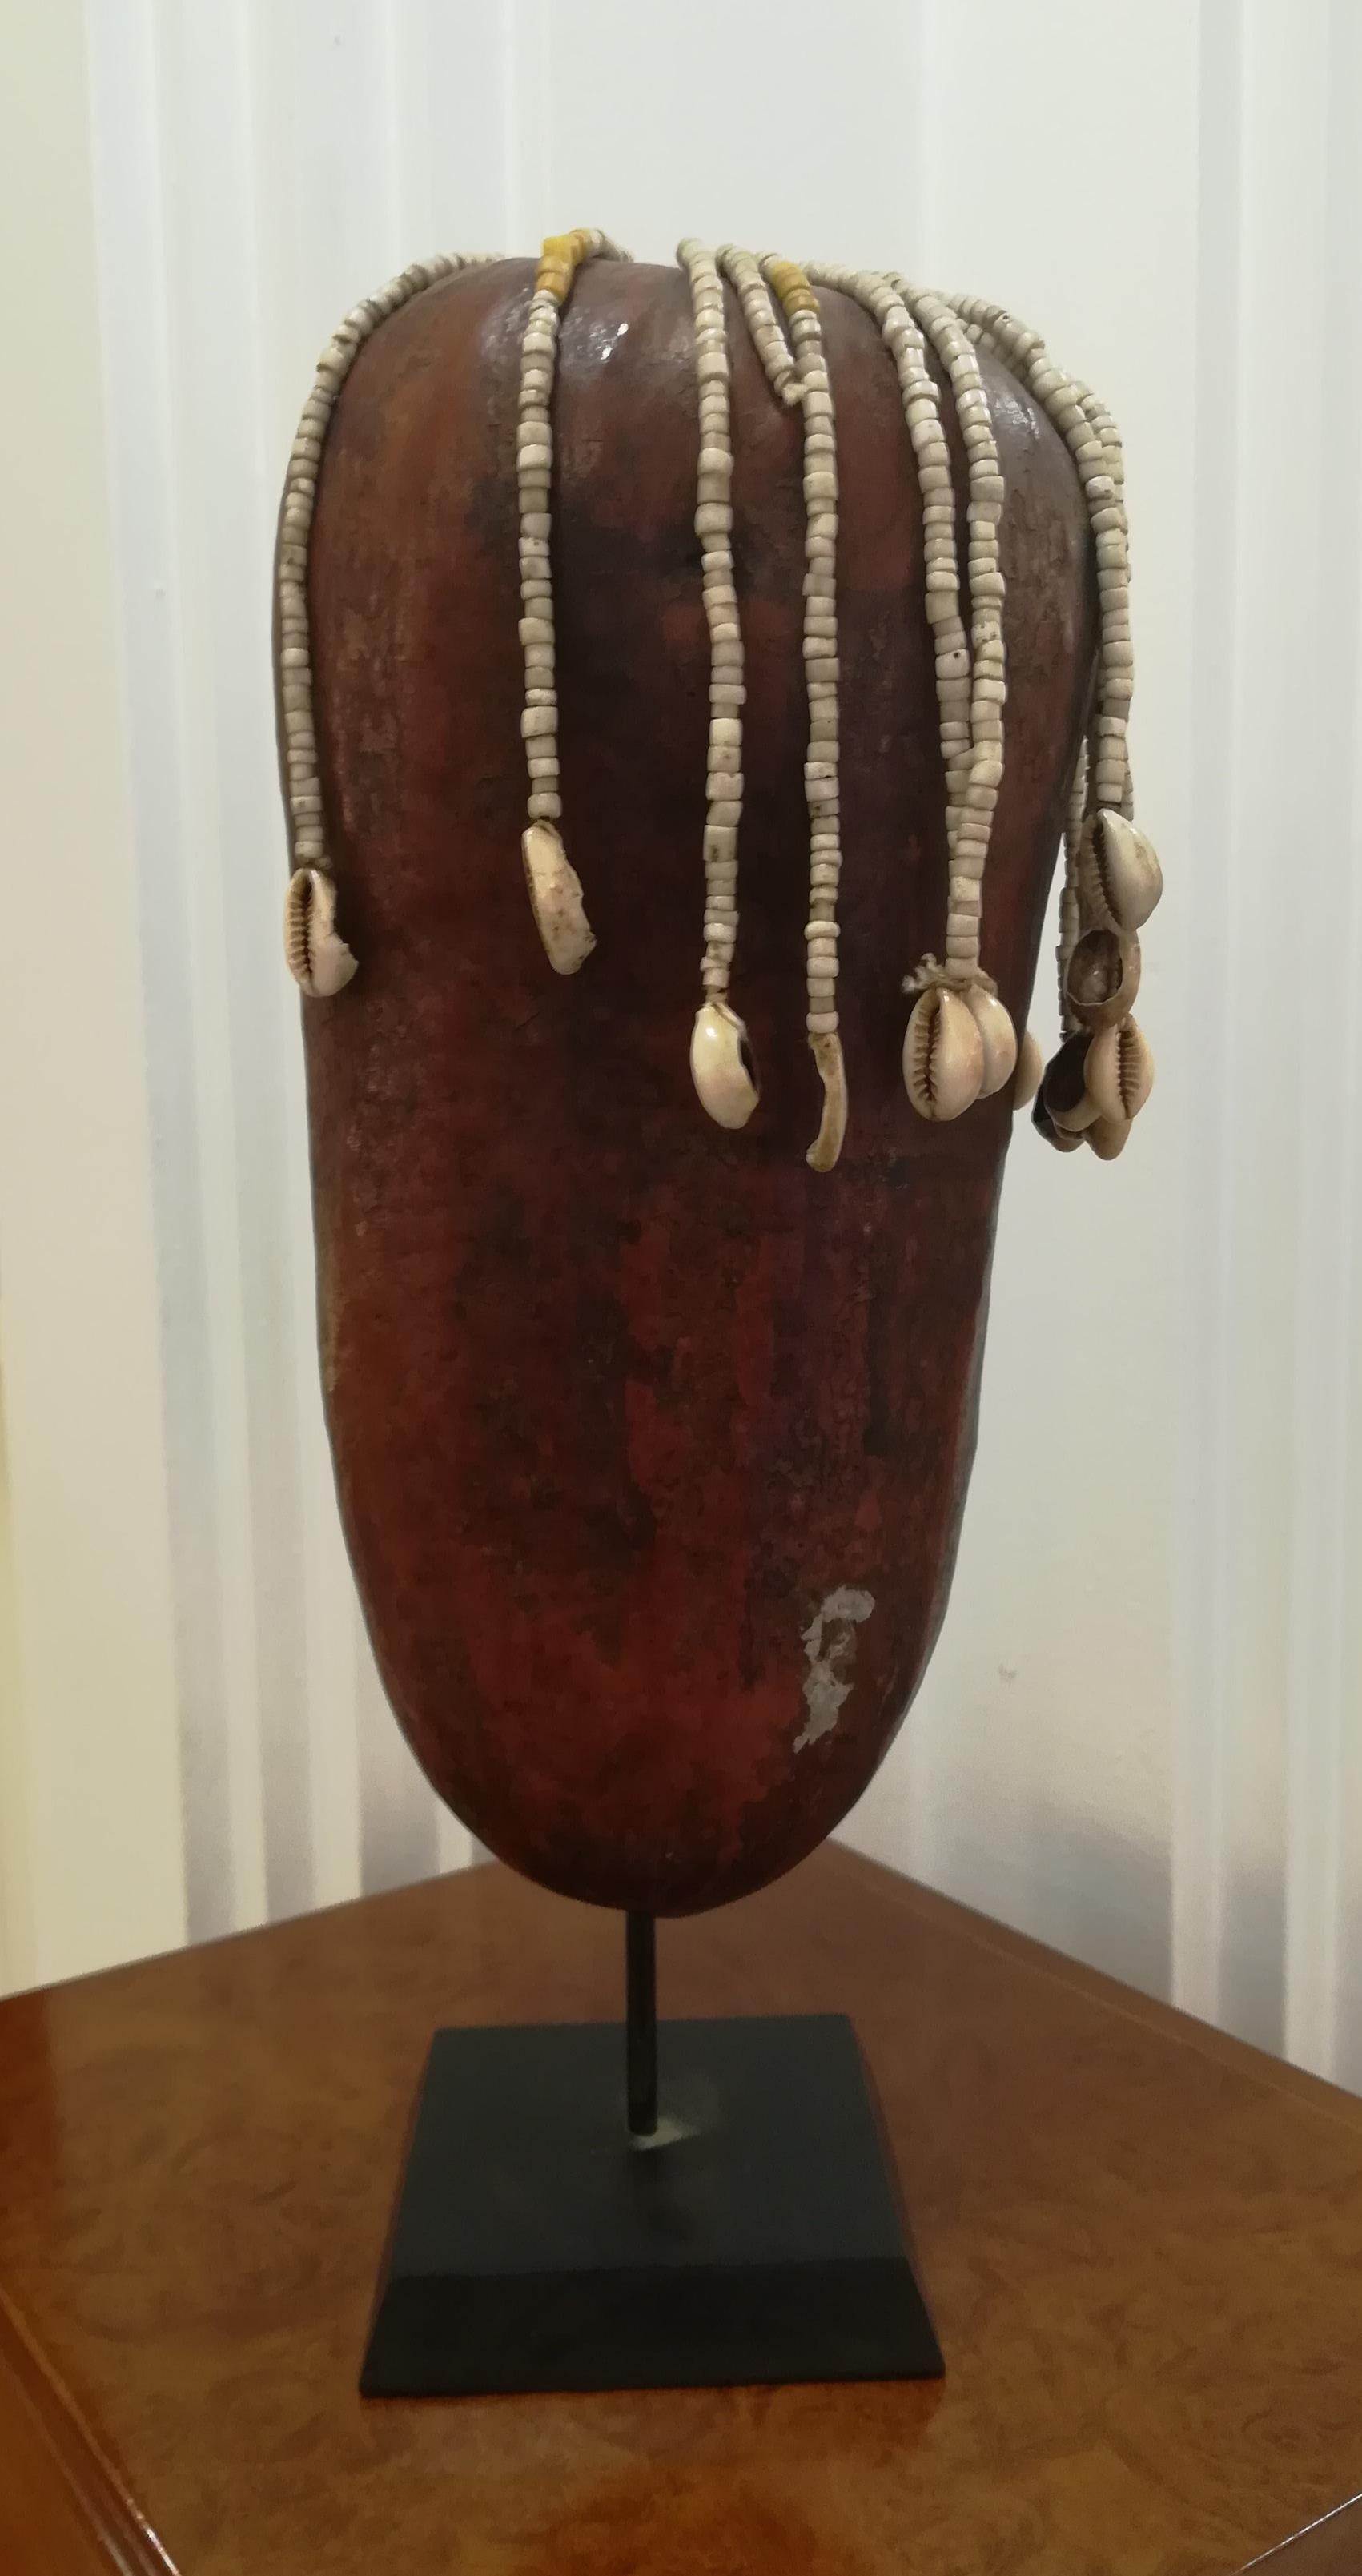 Fali Doll and percussion instrument Tanzania, beginning of the 20th century. Calabash and shells
Provenance: Galerie Bronsin, Galerie Alain de Monbrison.